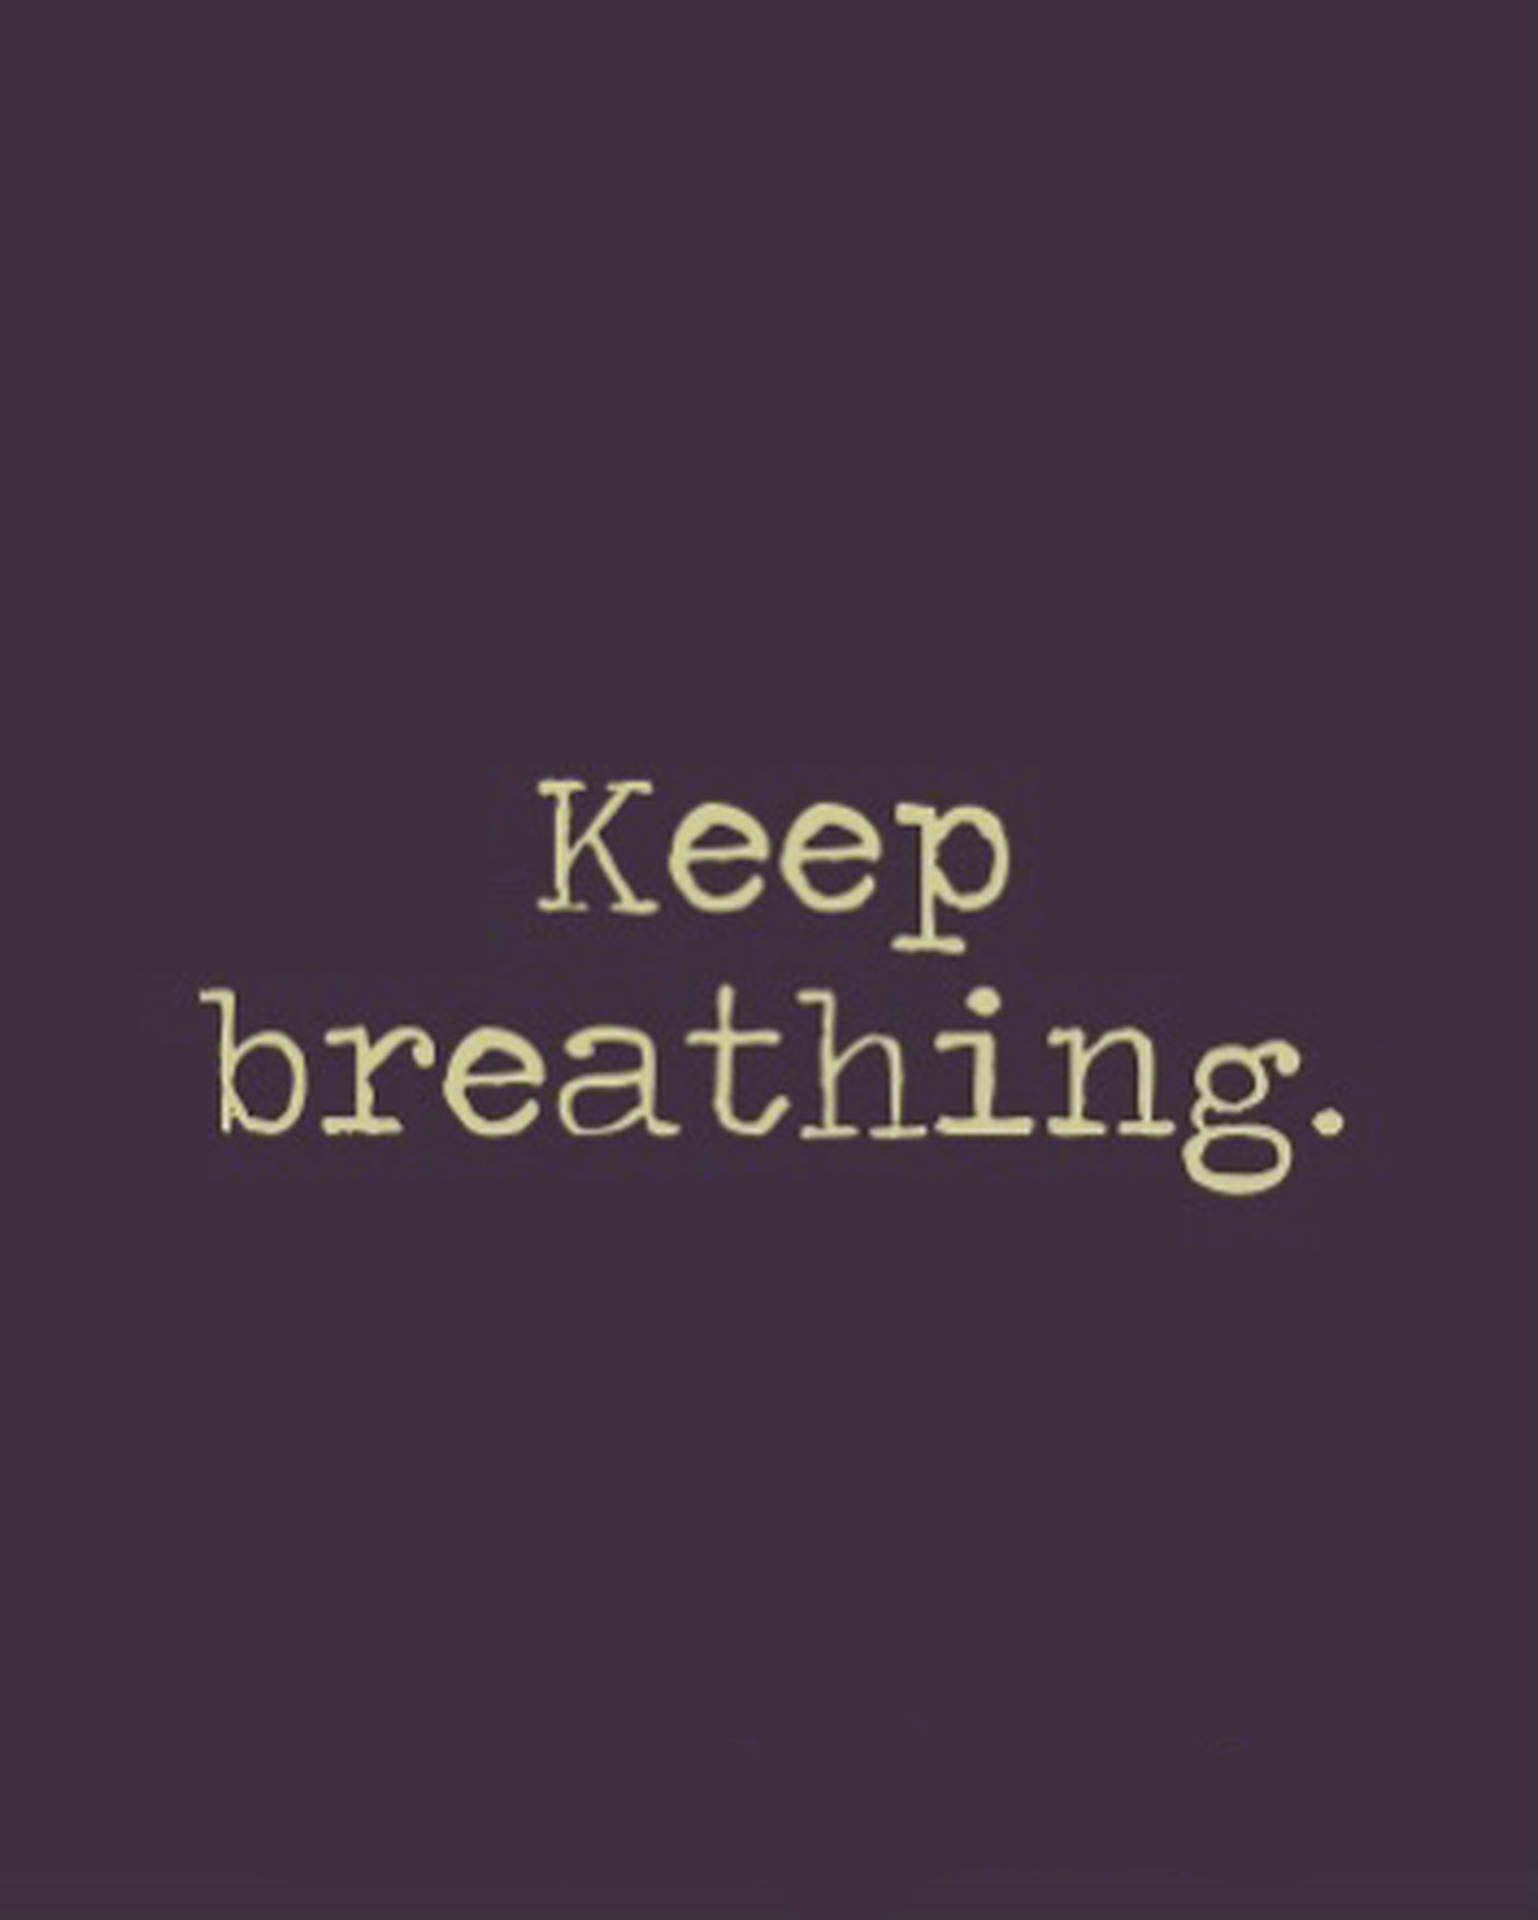 Download Keep Breathing Poster Wallpaper | Wallpapers.com